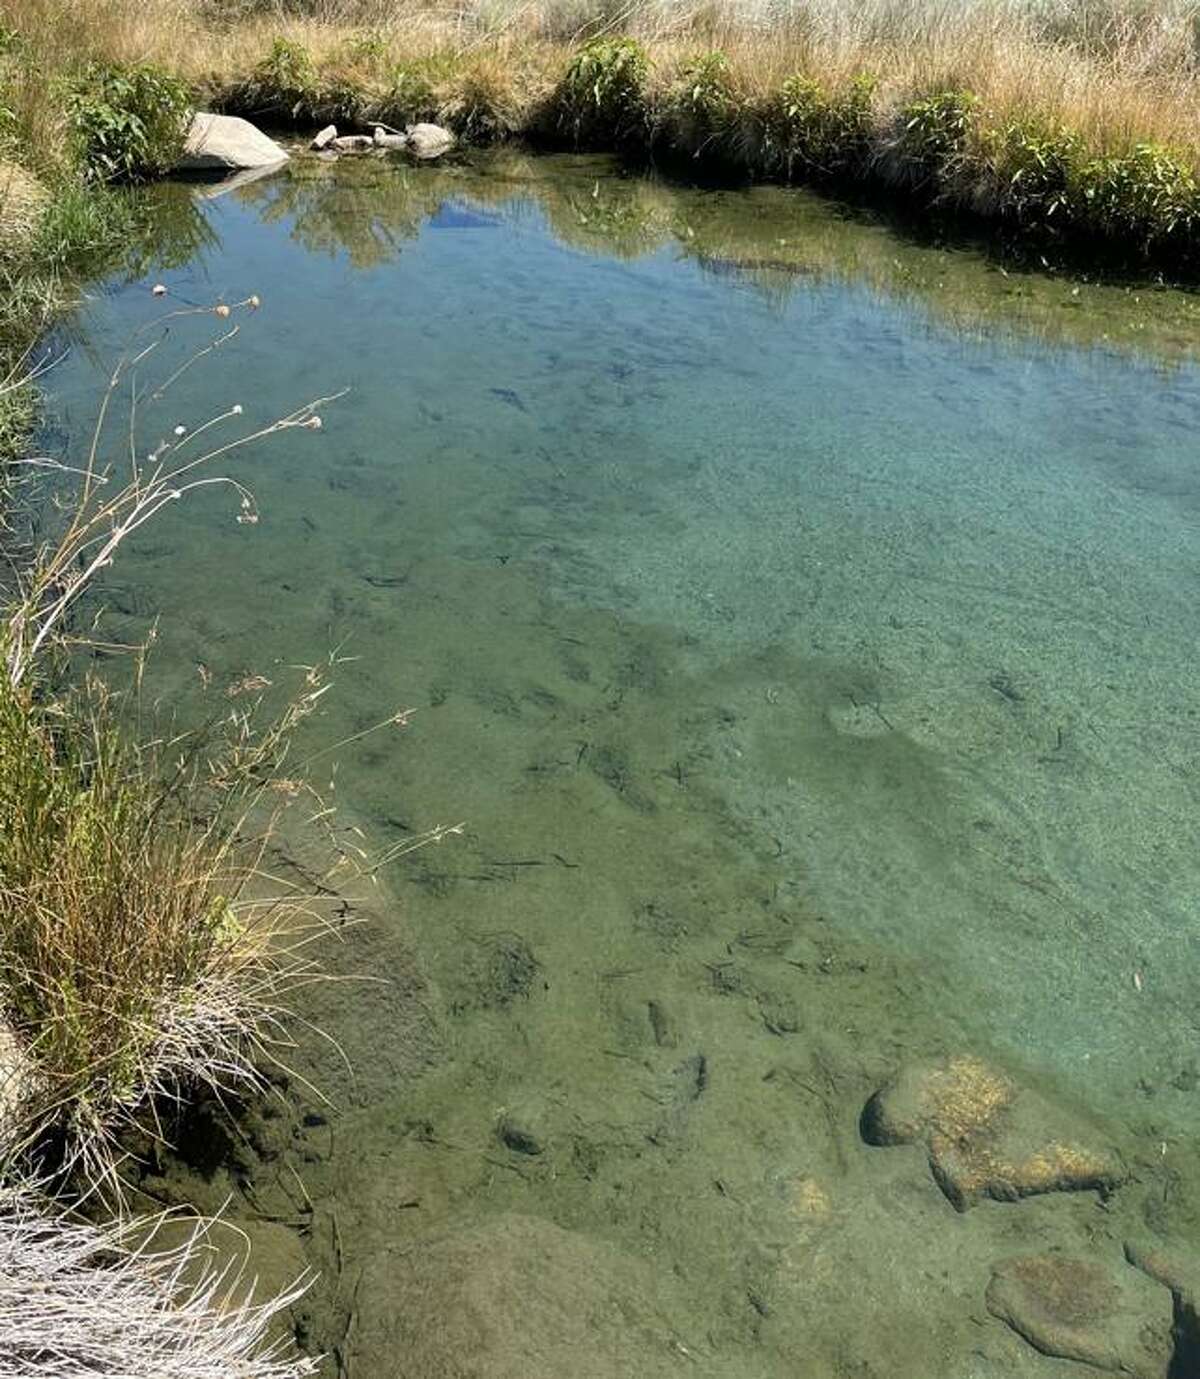 Hot Ditch, a natural hot springs destination in Bishop, Calif. Recent water testing at the popular California hot springs destination reportedly found that the same brain-eating amoeba that killed an 8-year-old boy remained present in the water.